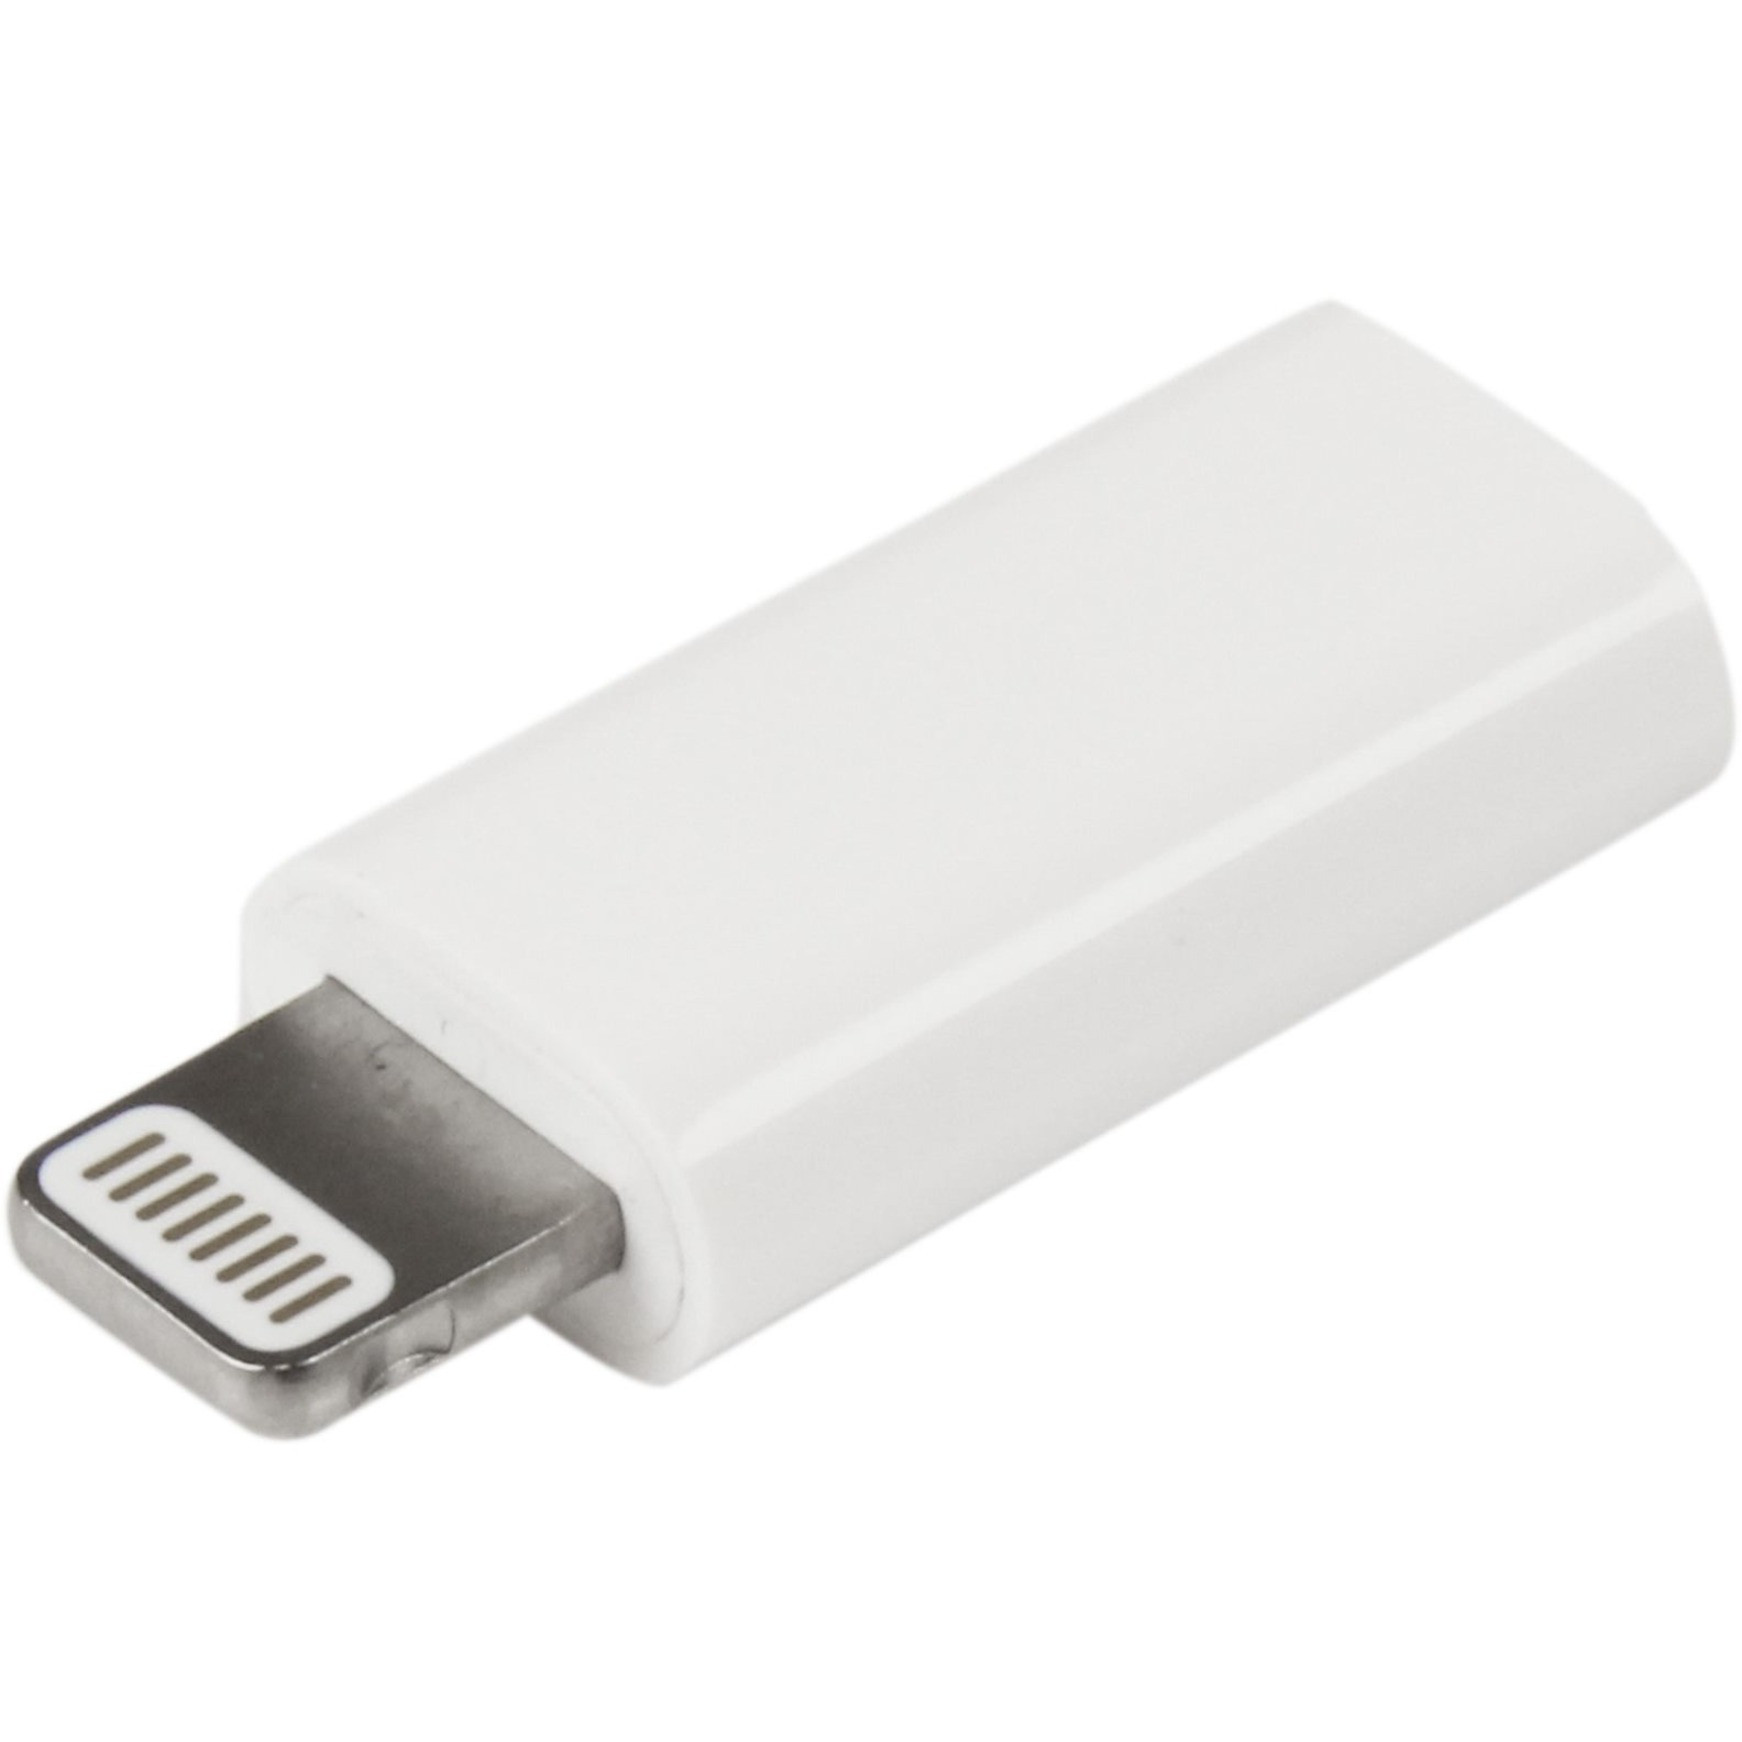 Startech .com White Apple 8-pin Lightning Connector Micro USB Adapter for iPhone / iPod / iPadCharge or Sync your iPhone, iPad... USBUBLTADPW - Corporate